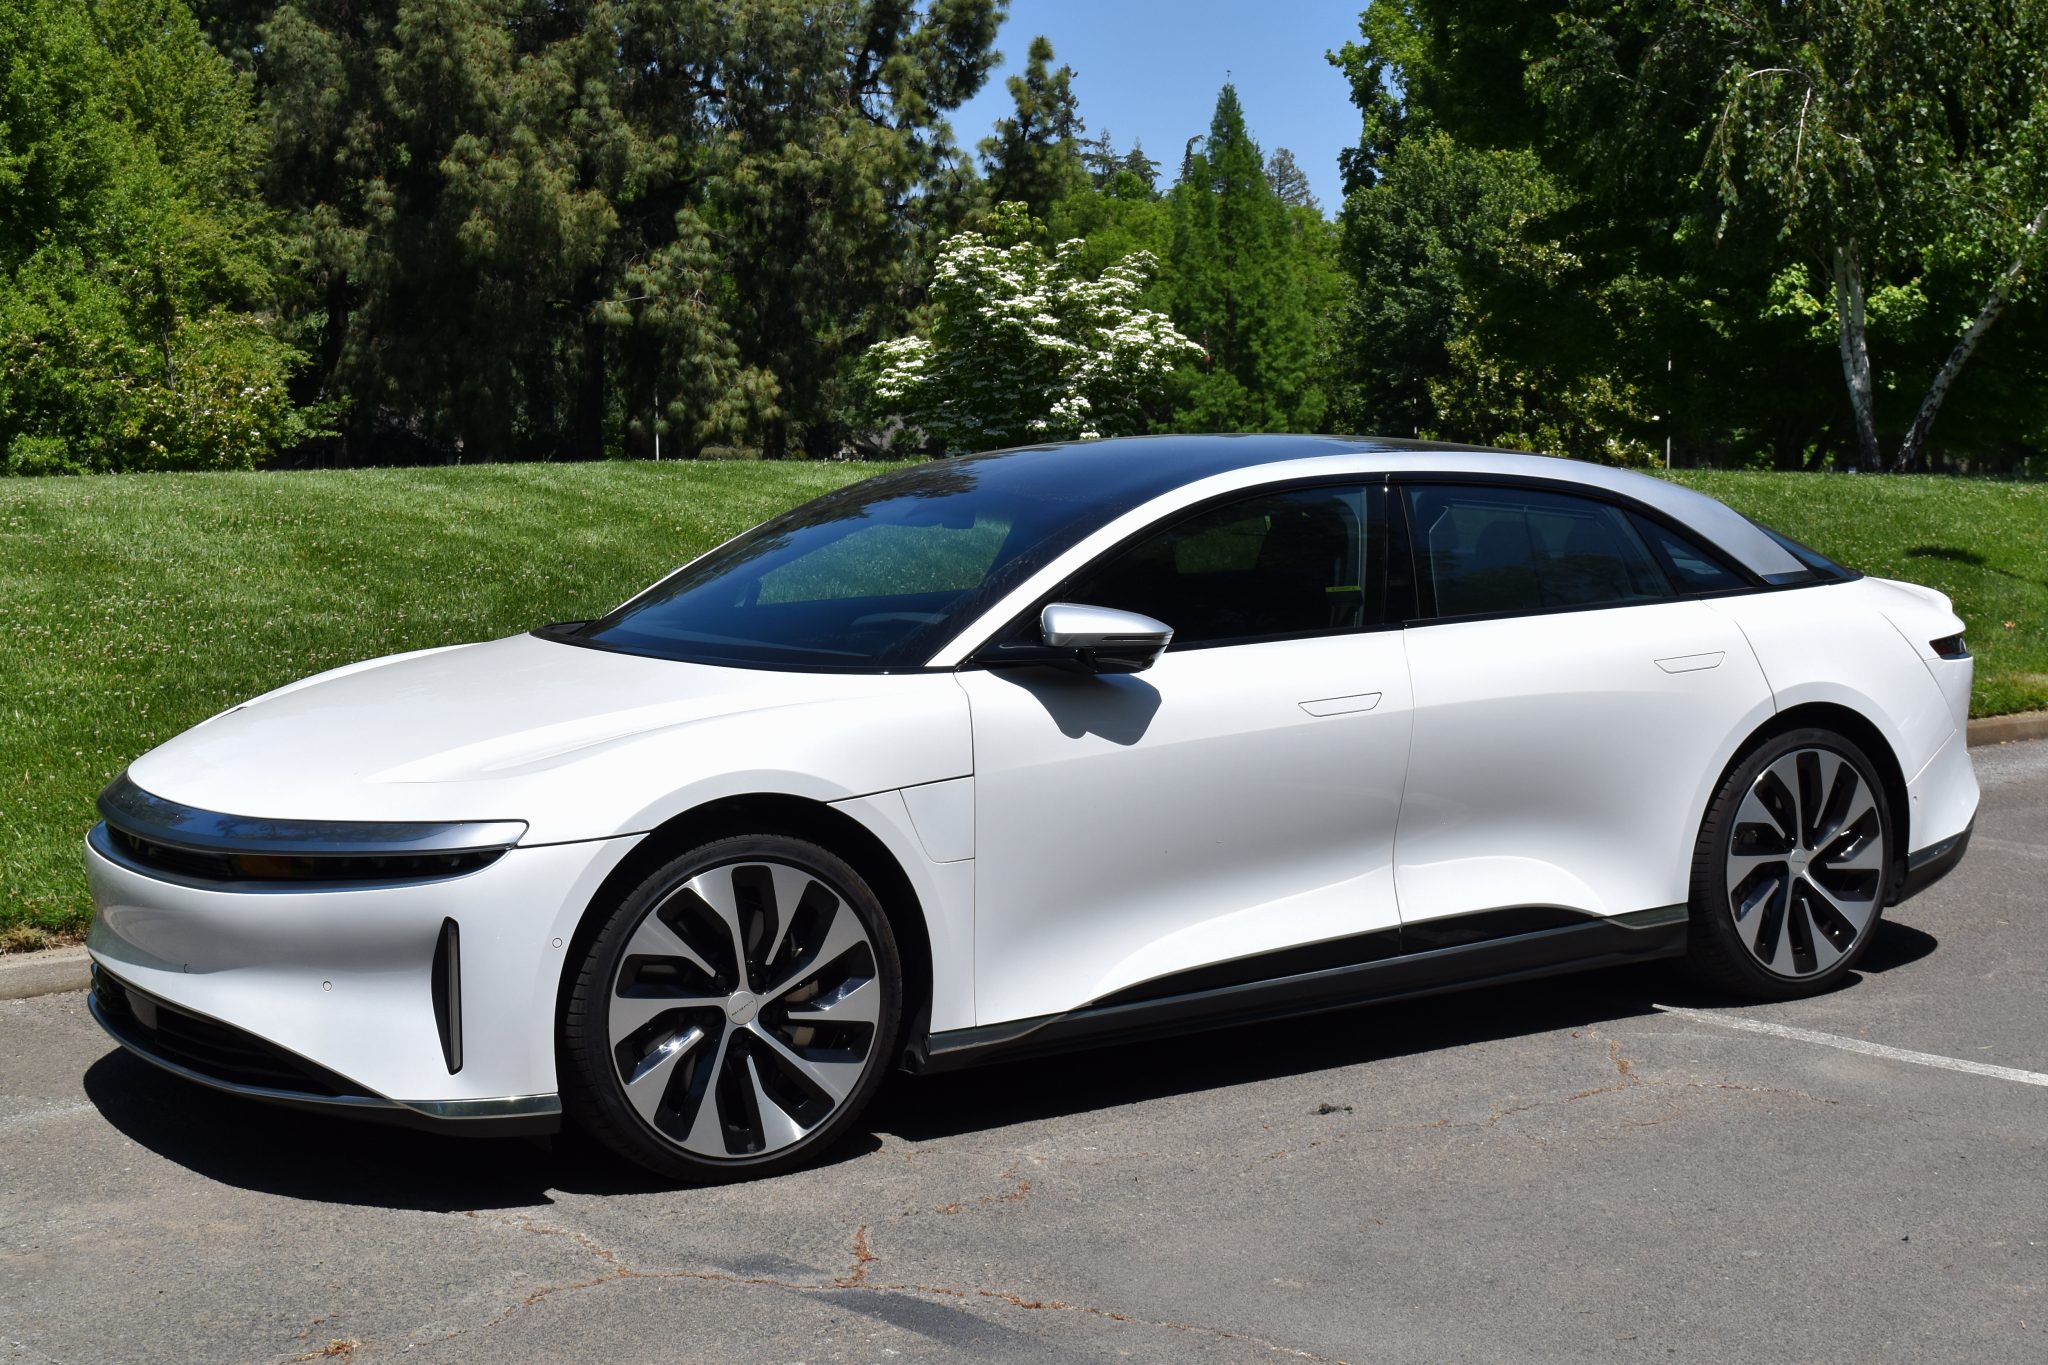 Recessed door handles and glass canopy-style roof are among the Lucid Air design highlights.